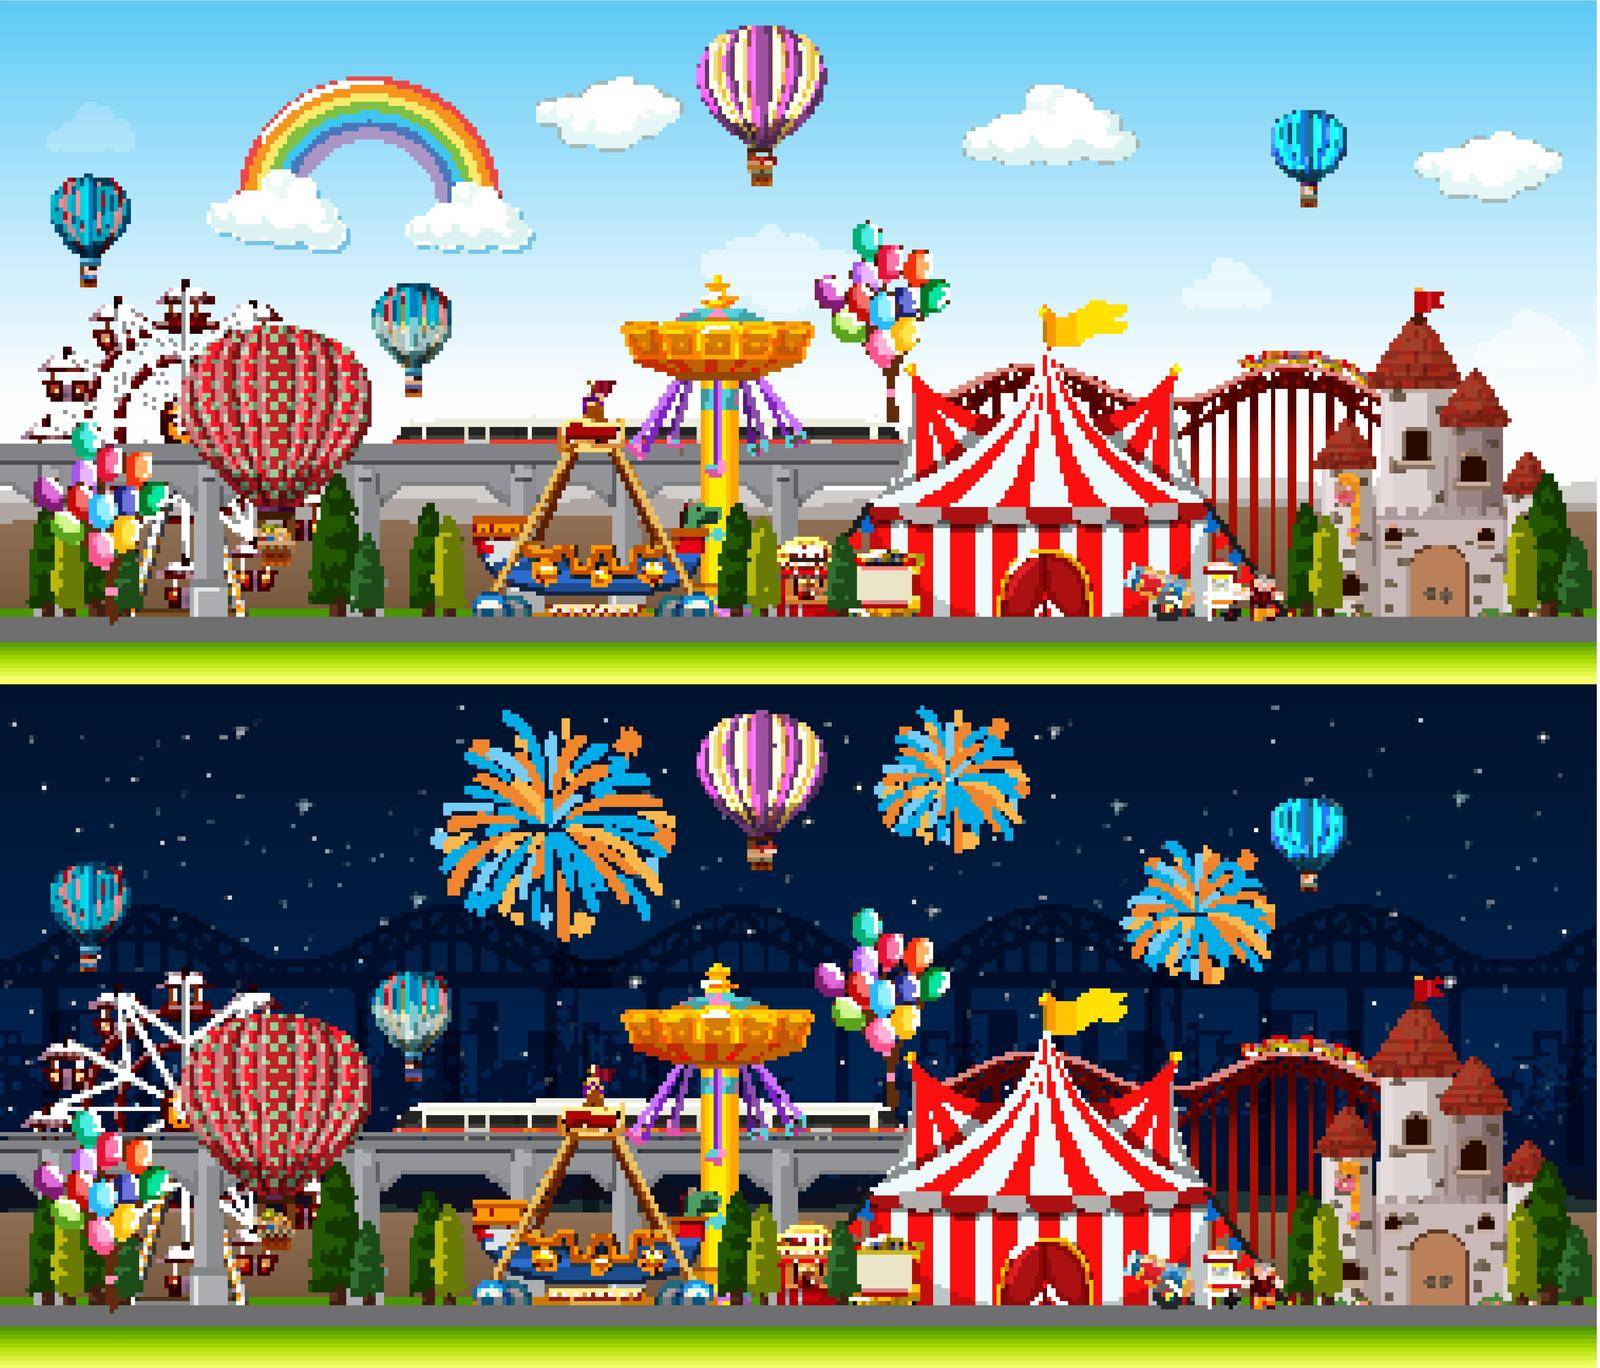 Themepark scenes with many rides at day time and night time illustration